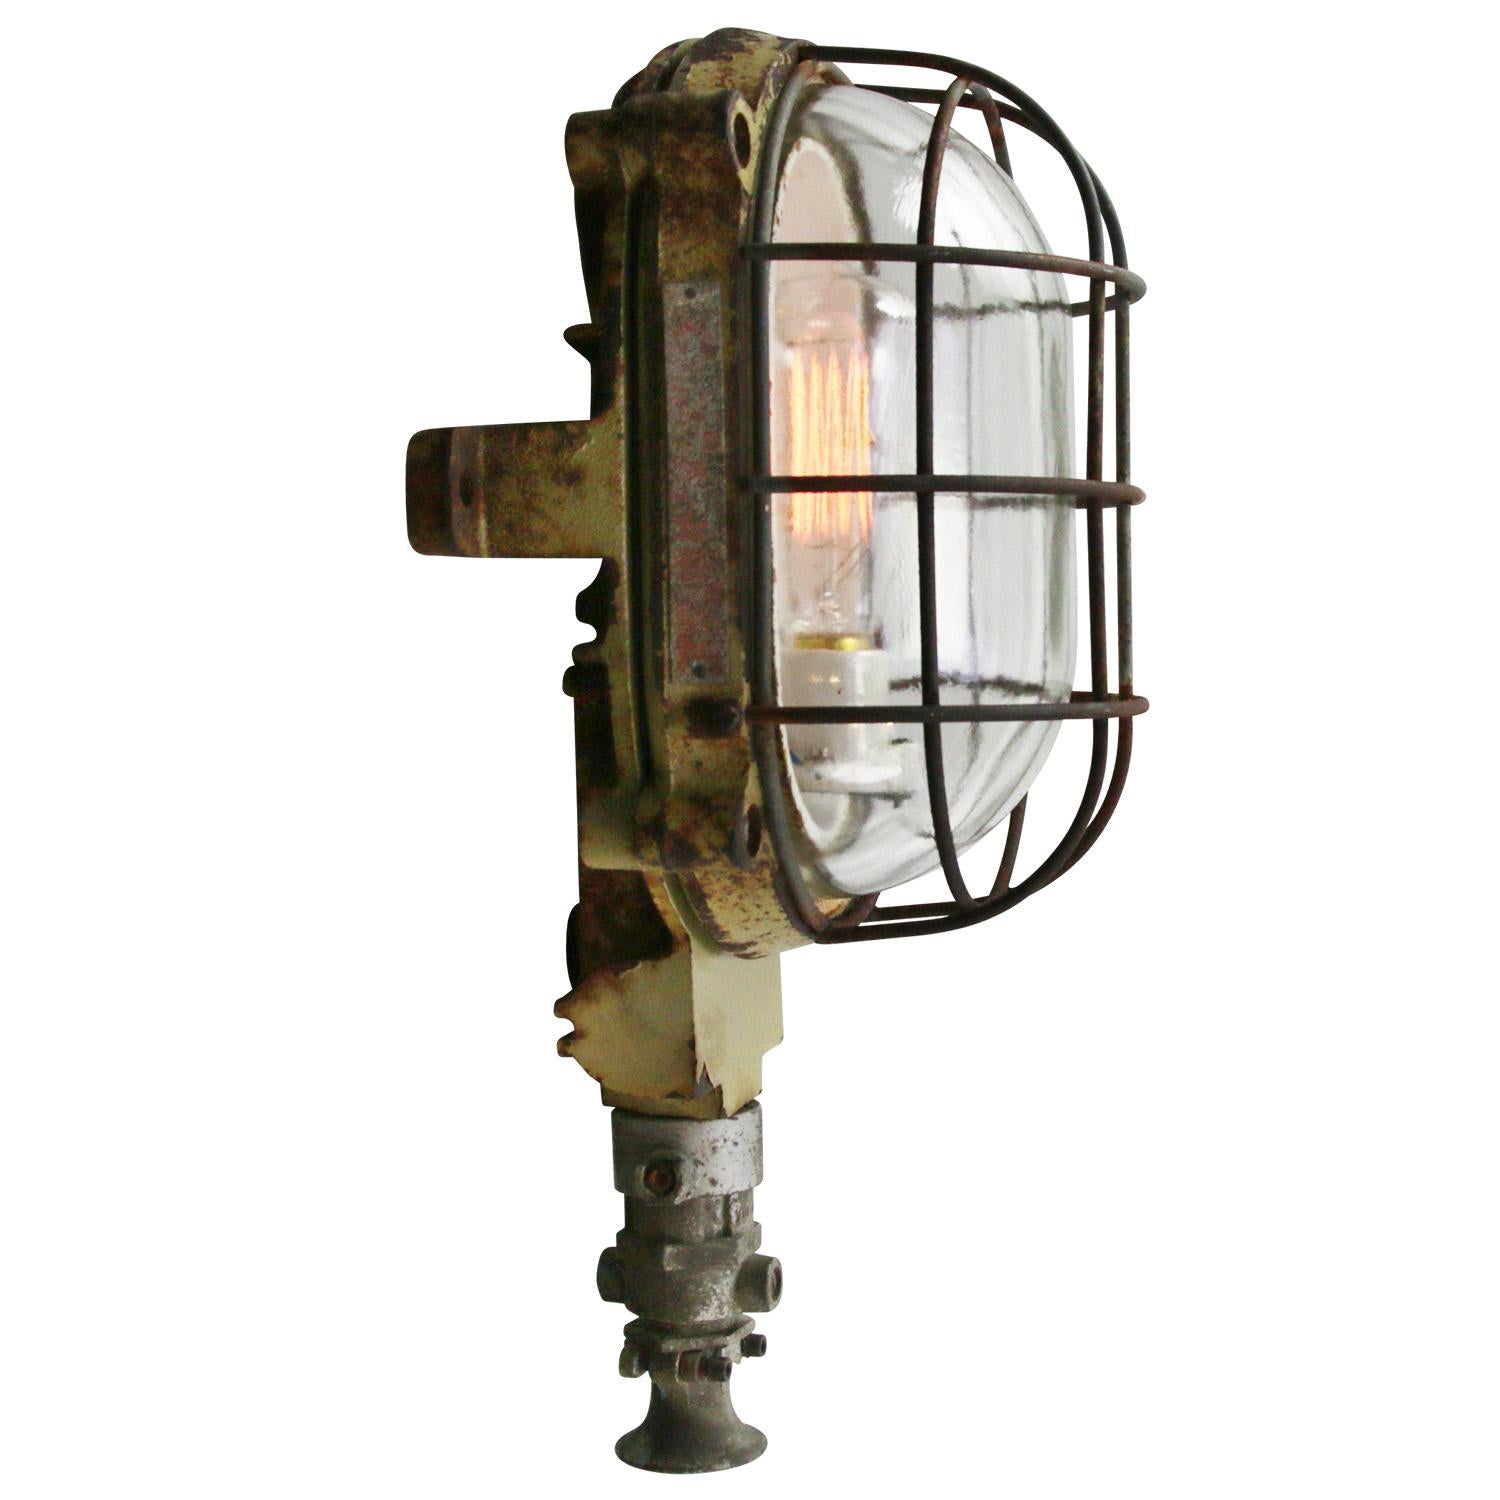 Industrial wall or ceiling lamp made by Mapelec Amiens, France
cast iron, clear glass

Measure: weight 11.70 kg / 25.8 lb

Priced per individual item. All lamps have been made suitable by international standards for incandescent light bulbs,